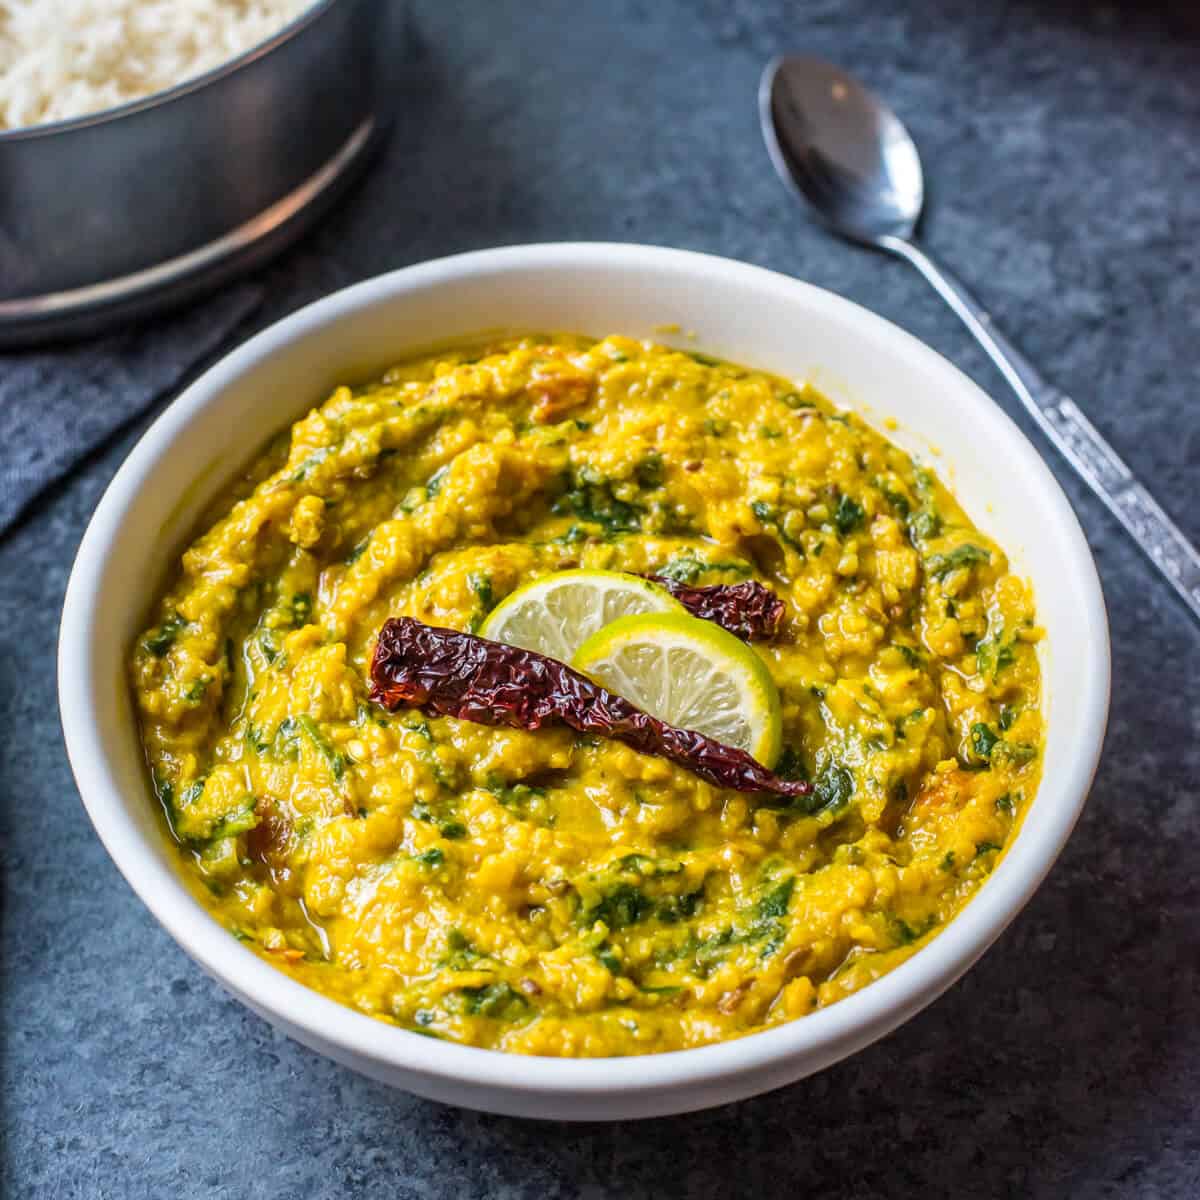 Dal palak served in a white bowl topped with red chili and lime slices